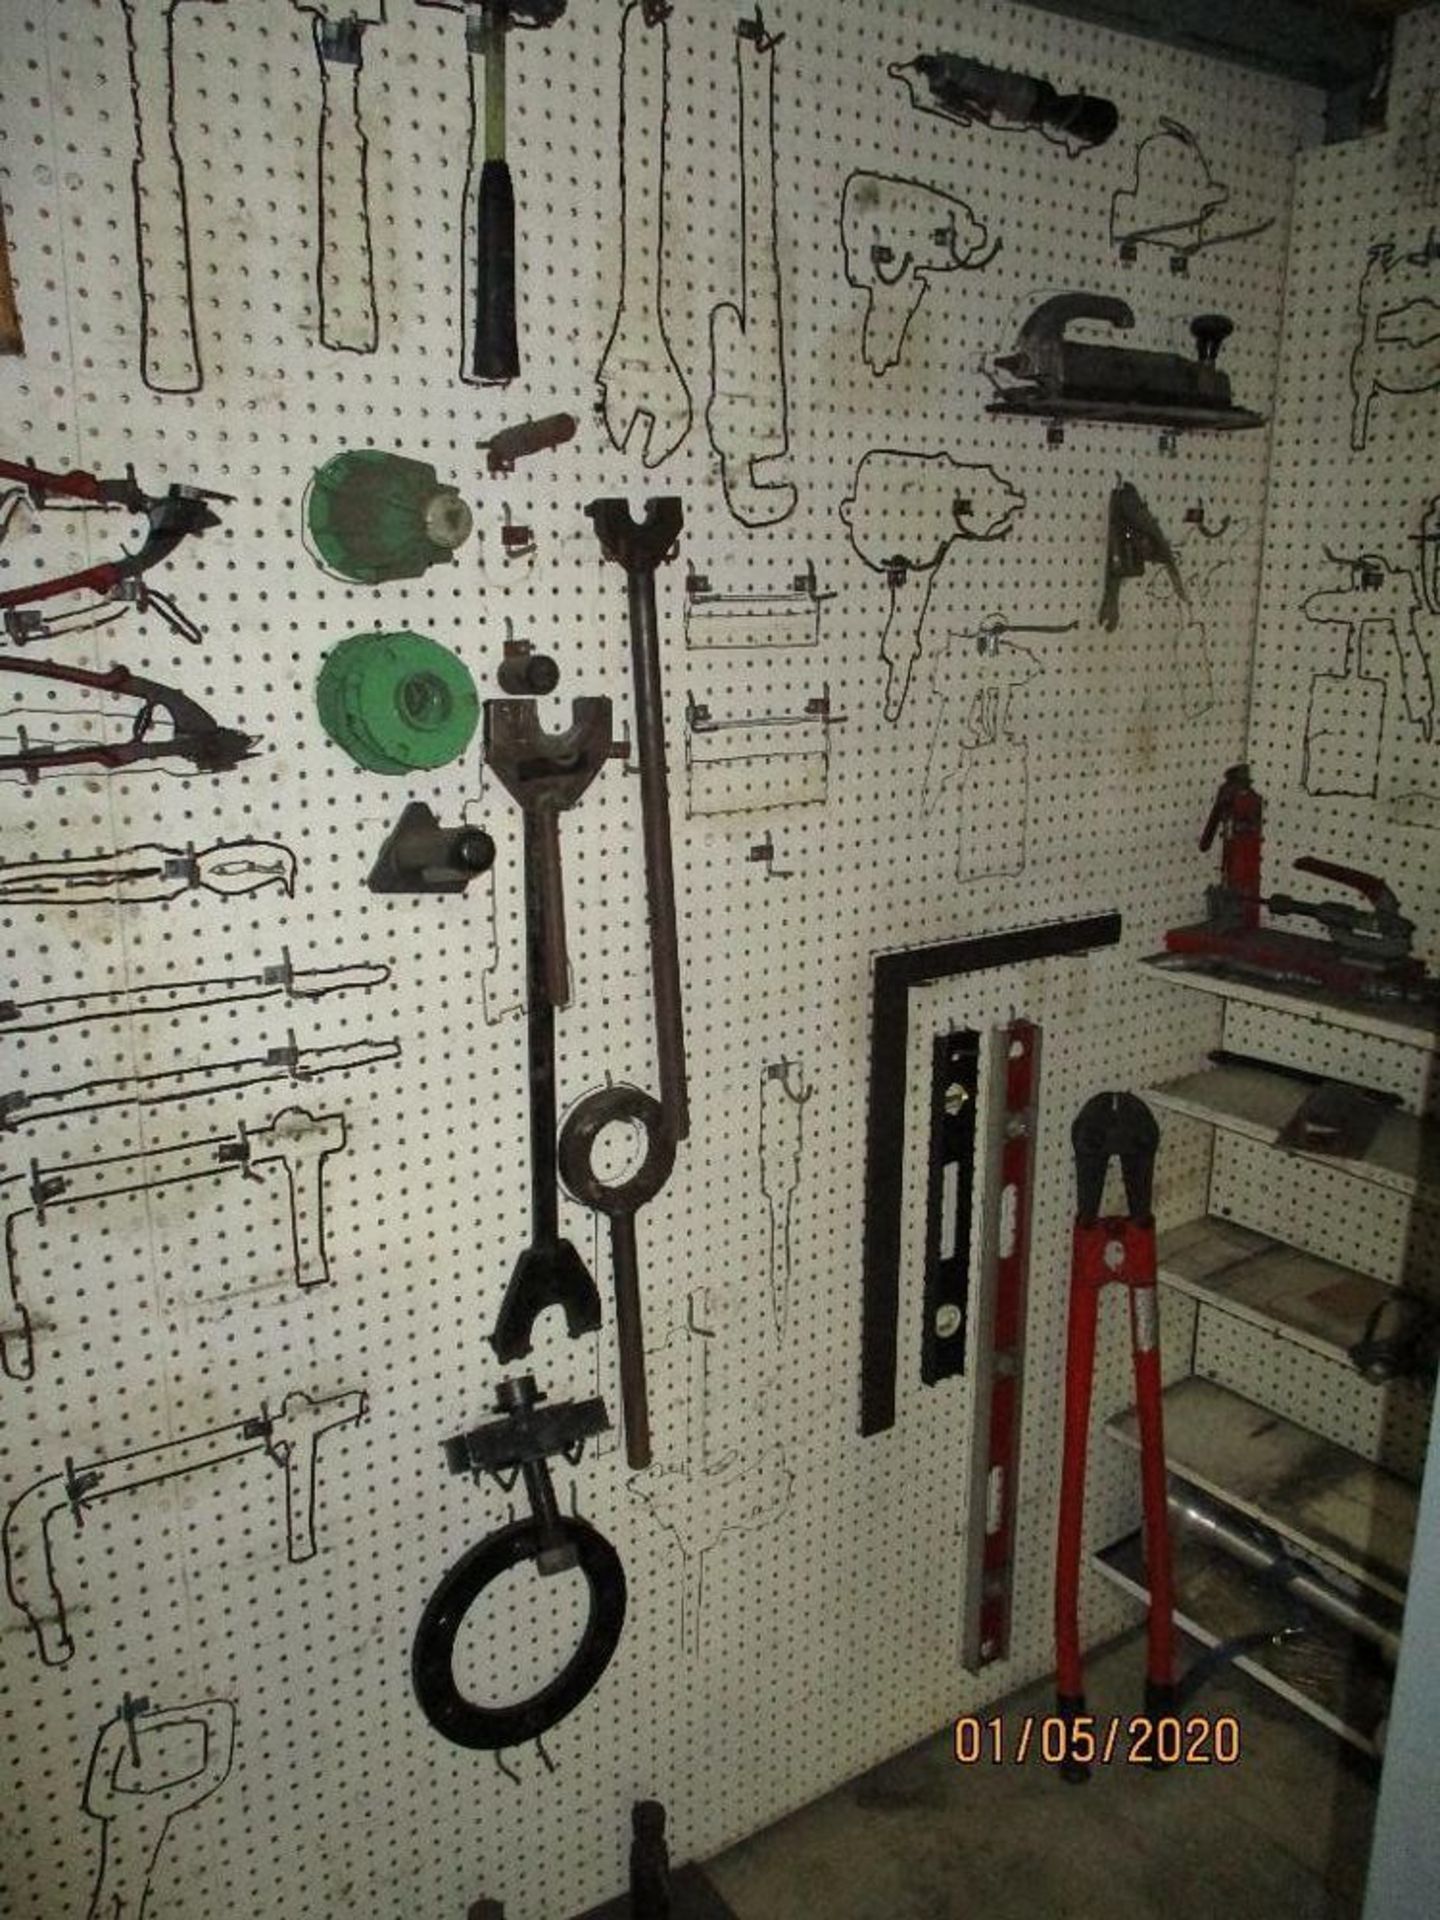 Contents Of Racking Including Hand Tools, Hydrulic Cylinders, Drive Motors, Pump Motors Etc. - Image 6 of 7